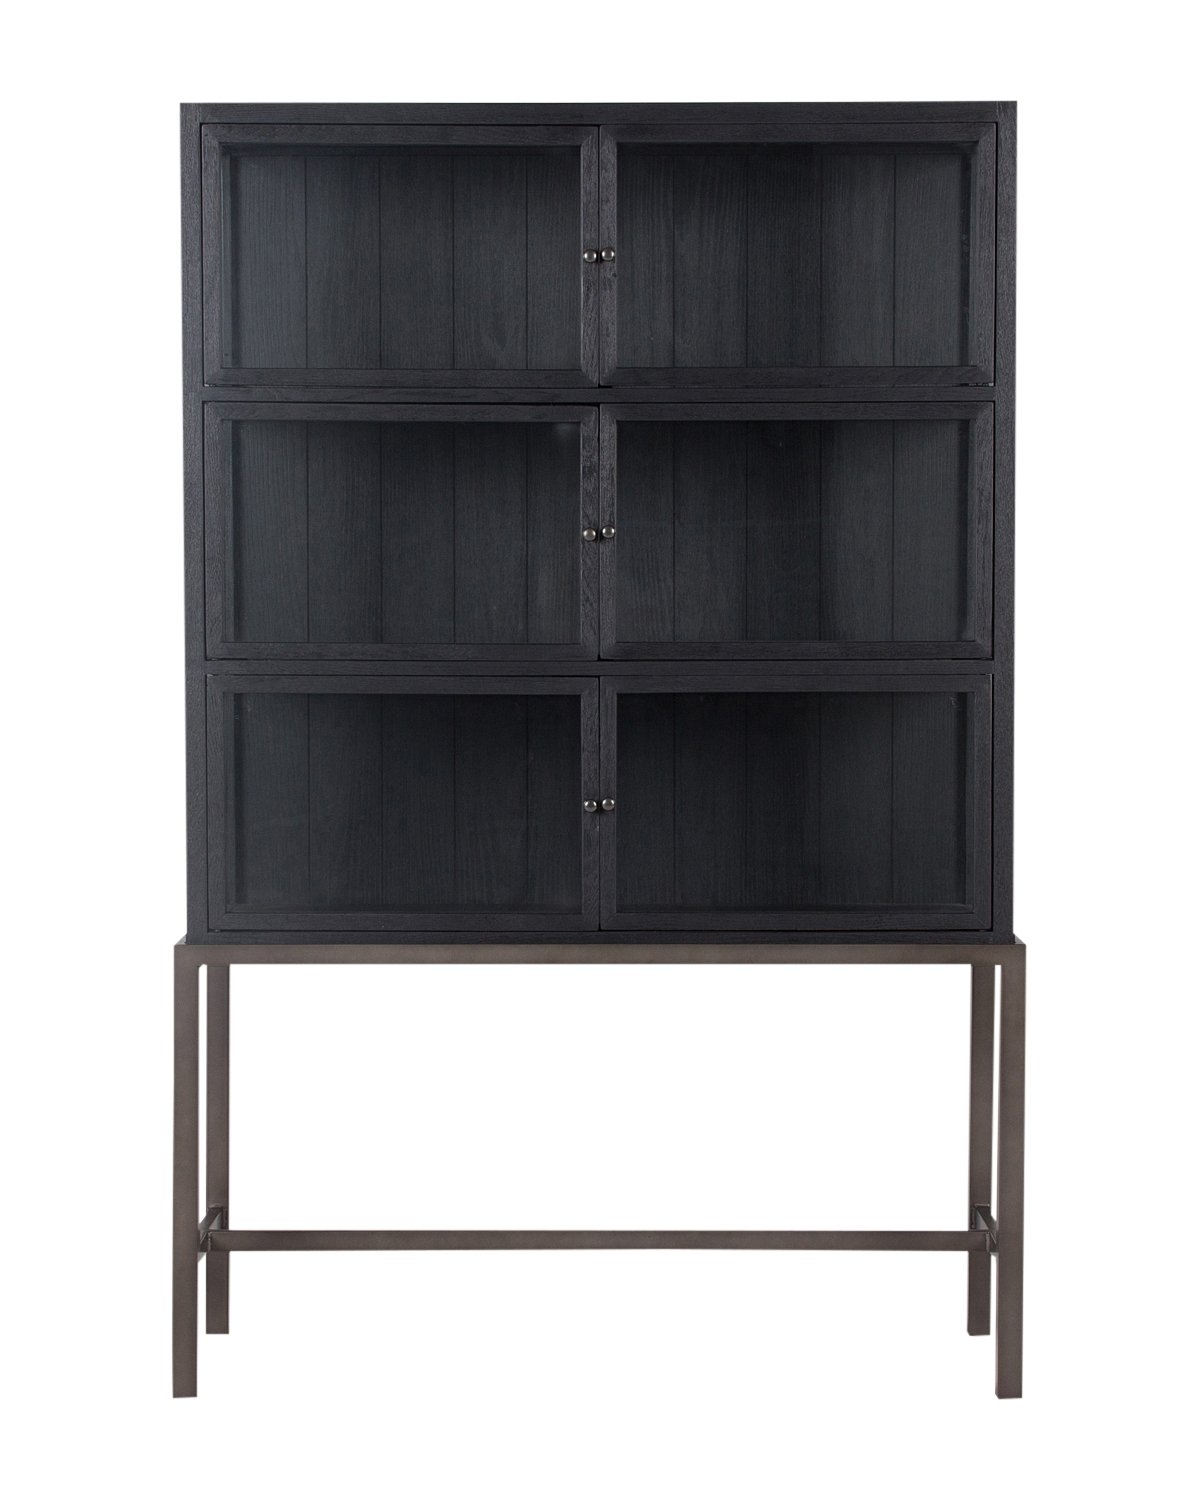 LAWLEY CABINET, DRIFTED BLACK - Image 0